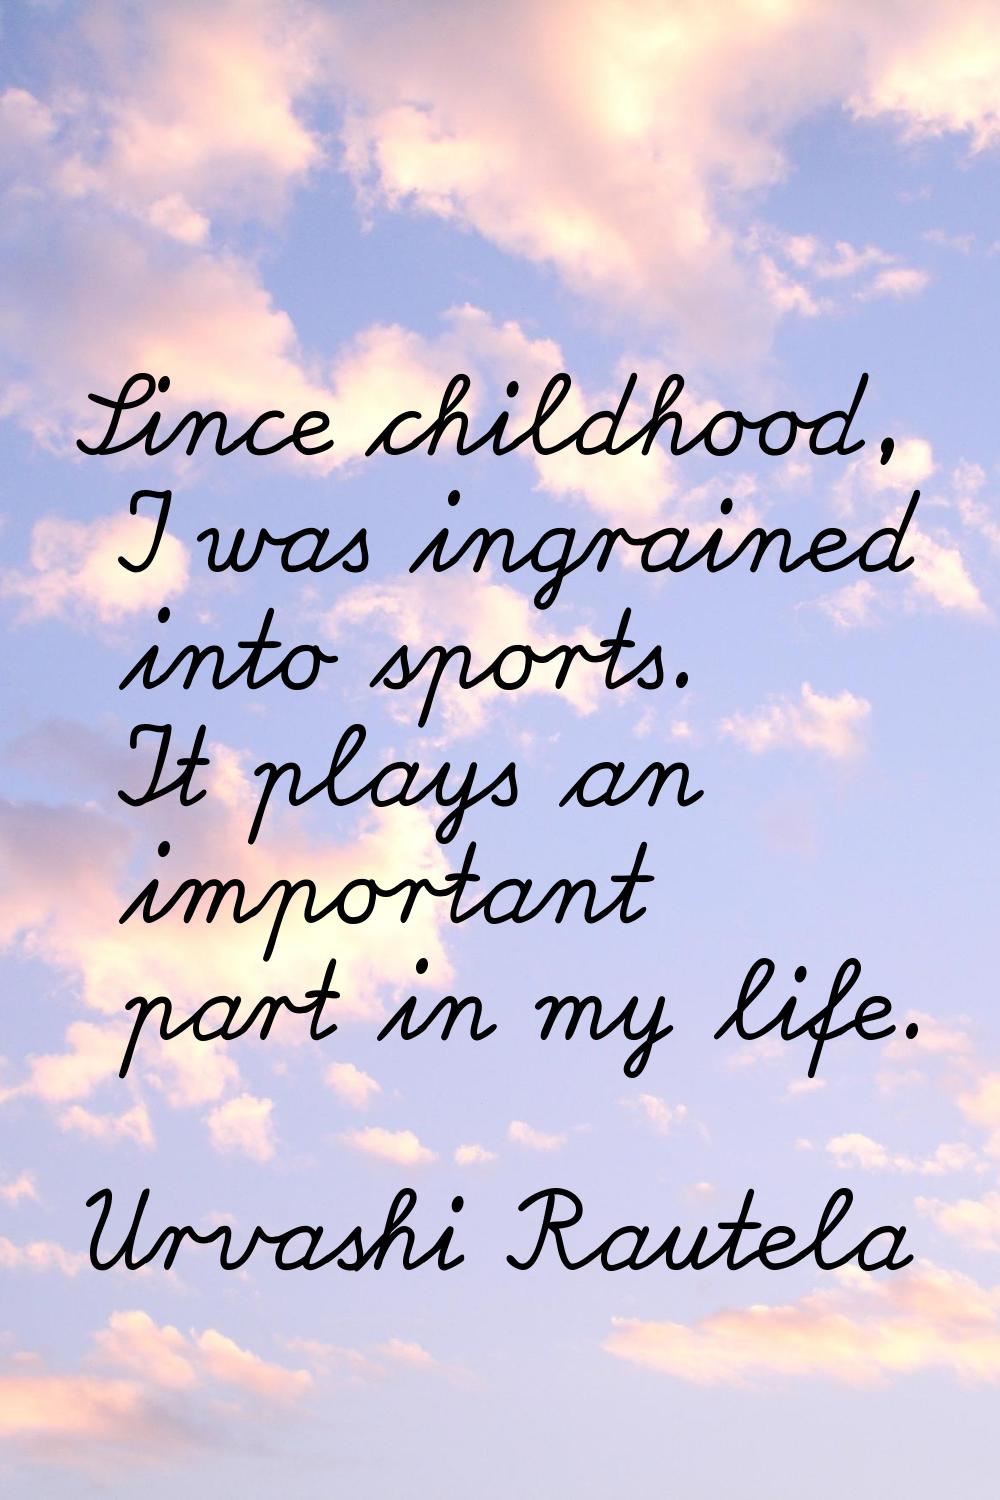 Since childhood, I was ingrained into sports. It plays an important part in my life.